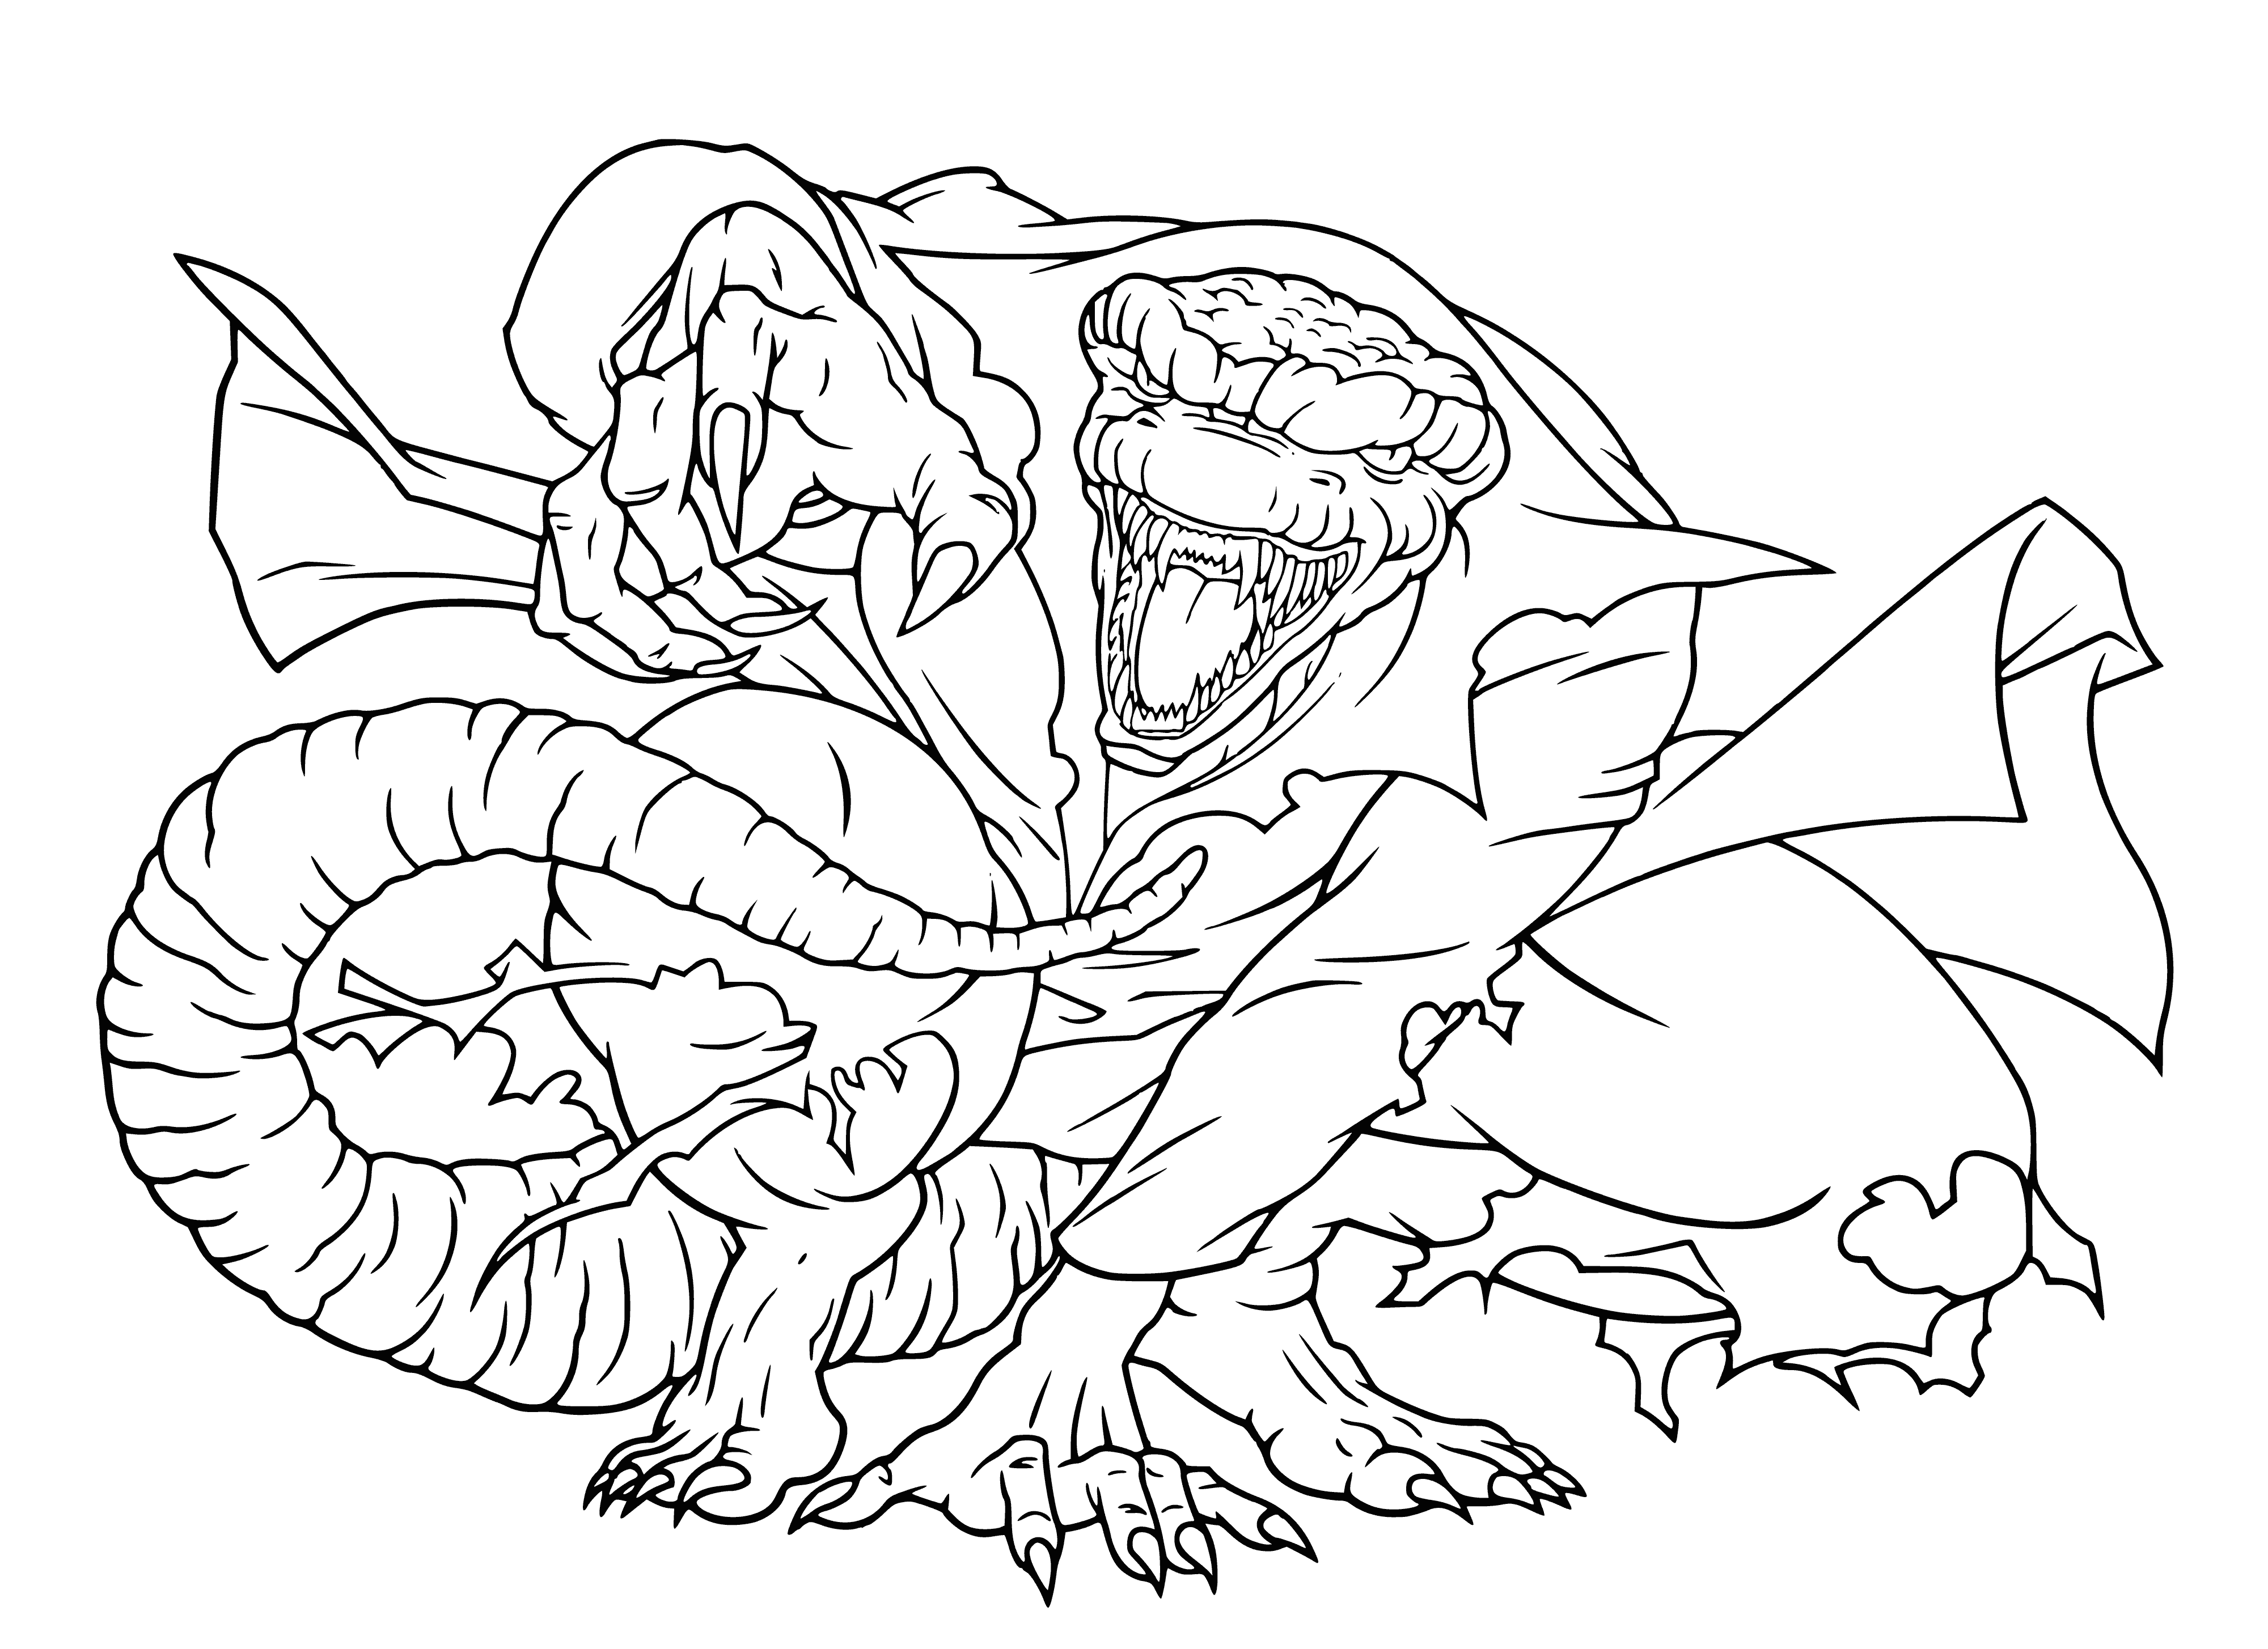 Supervillain Lizard coloring page